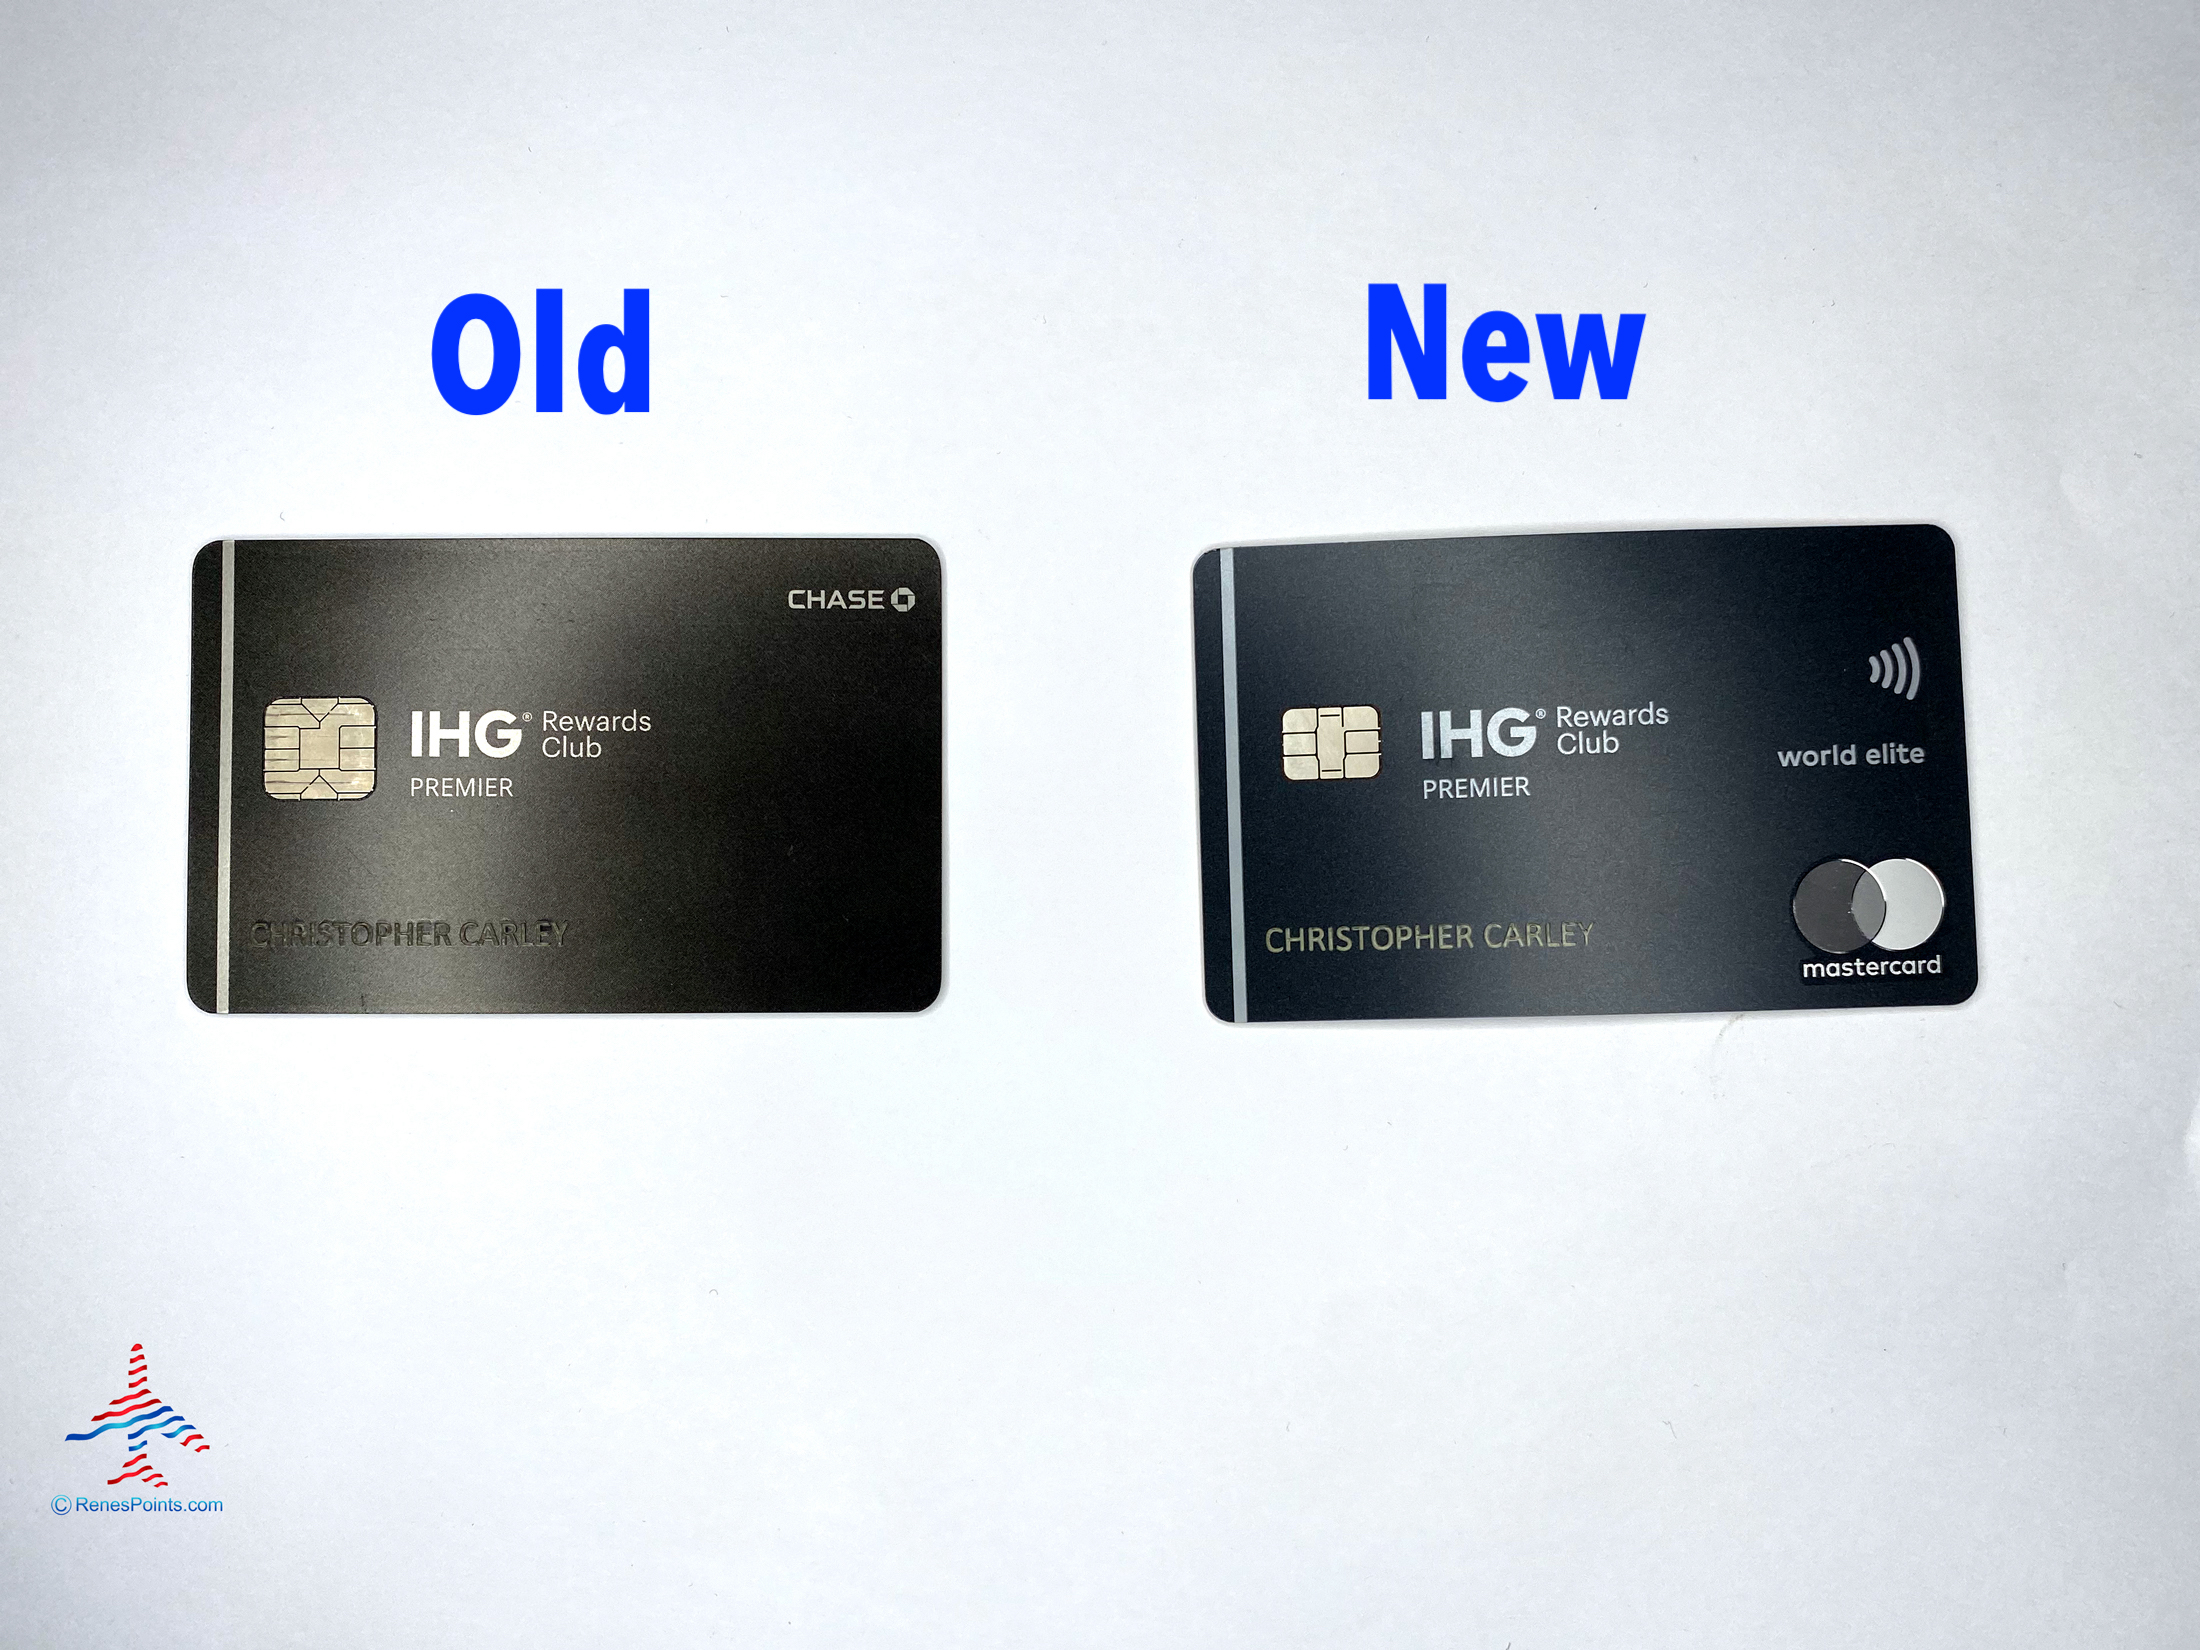 Our First Look: The Redesigned IHG Rewards Club Premier Card